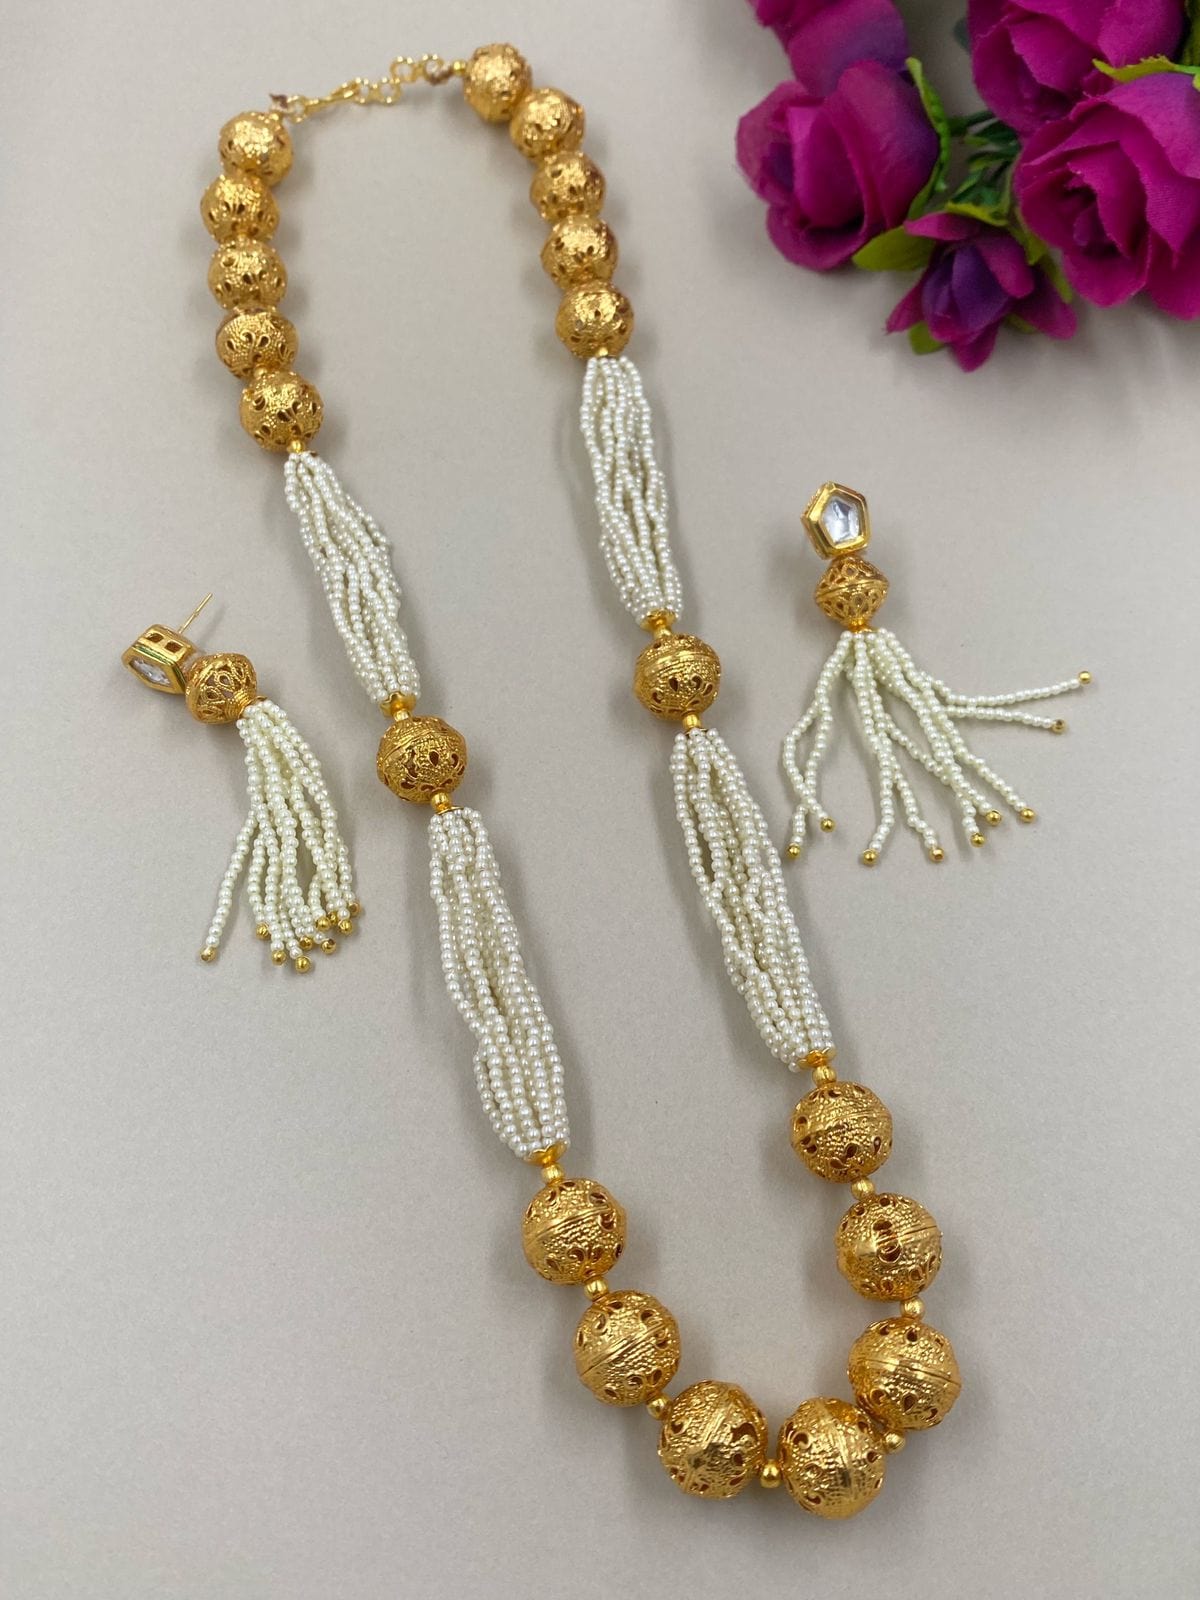 Buy Golden Beads and Small Beads Necklace, Indian Jewellery, Fancy  Necklacedaily Wear, Gift for Her Online in India - Etsy